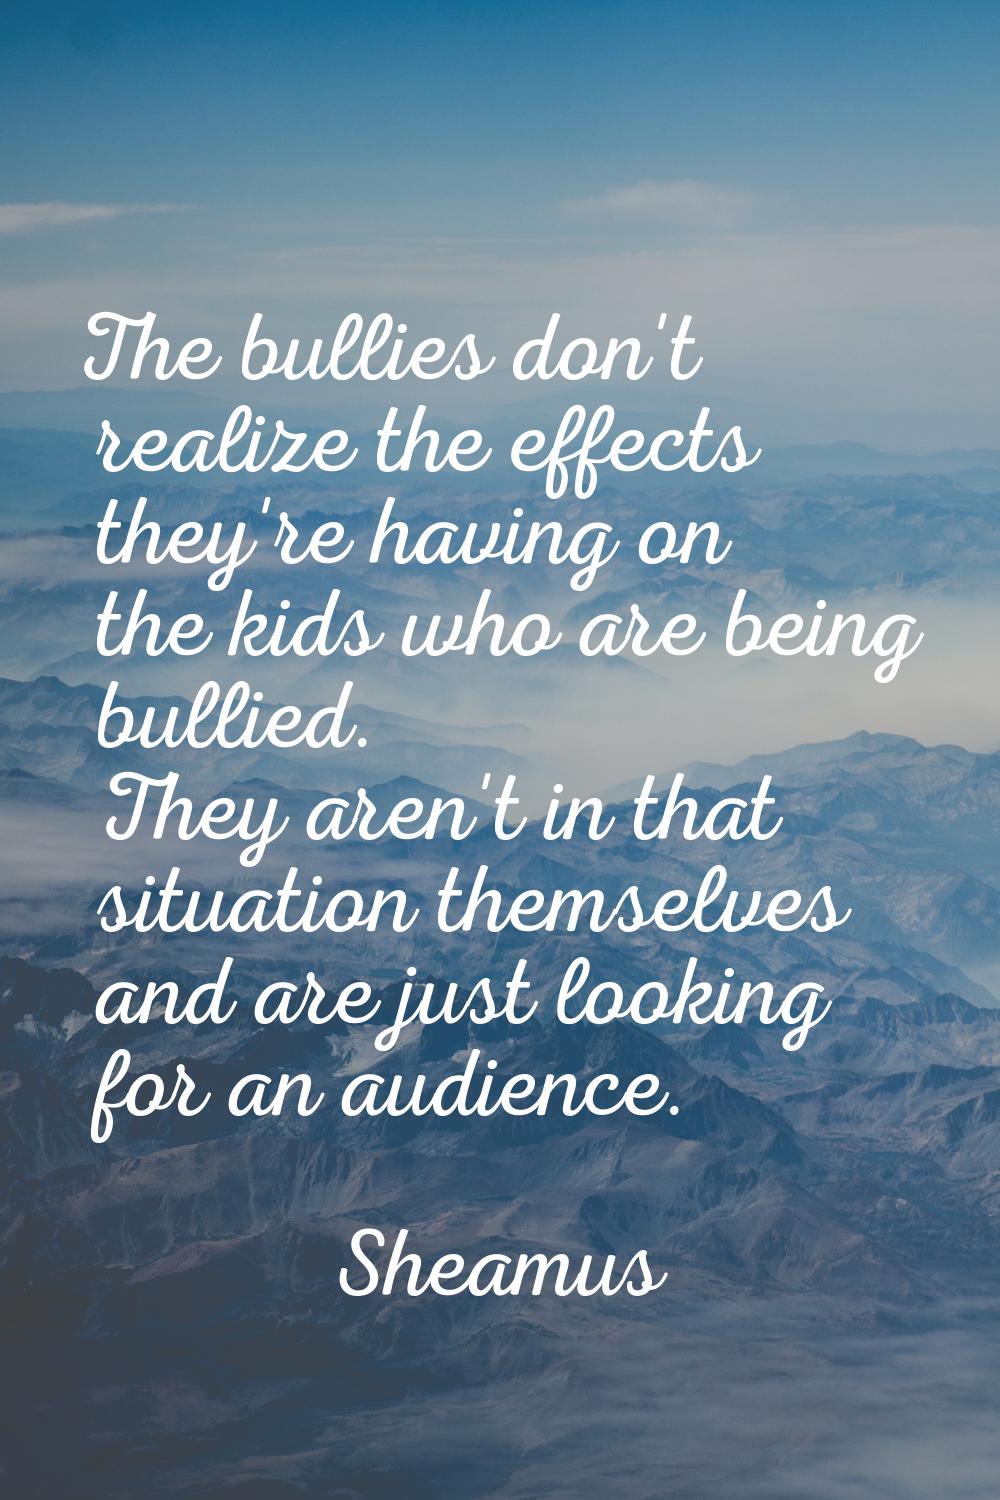 The bullies don't realize the effects they're having on the kids who are being bullied. They aren't